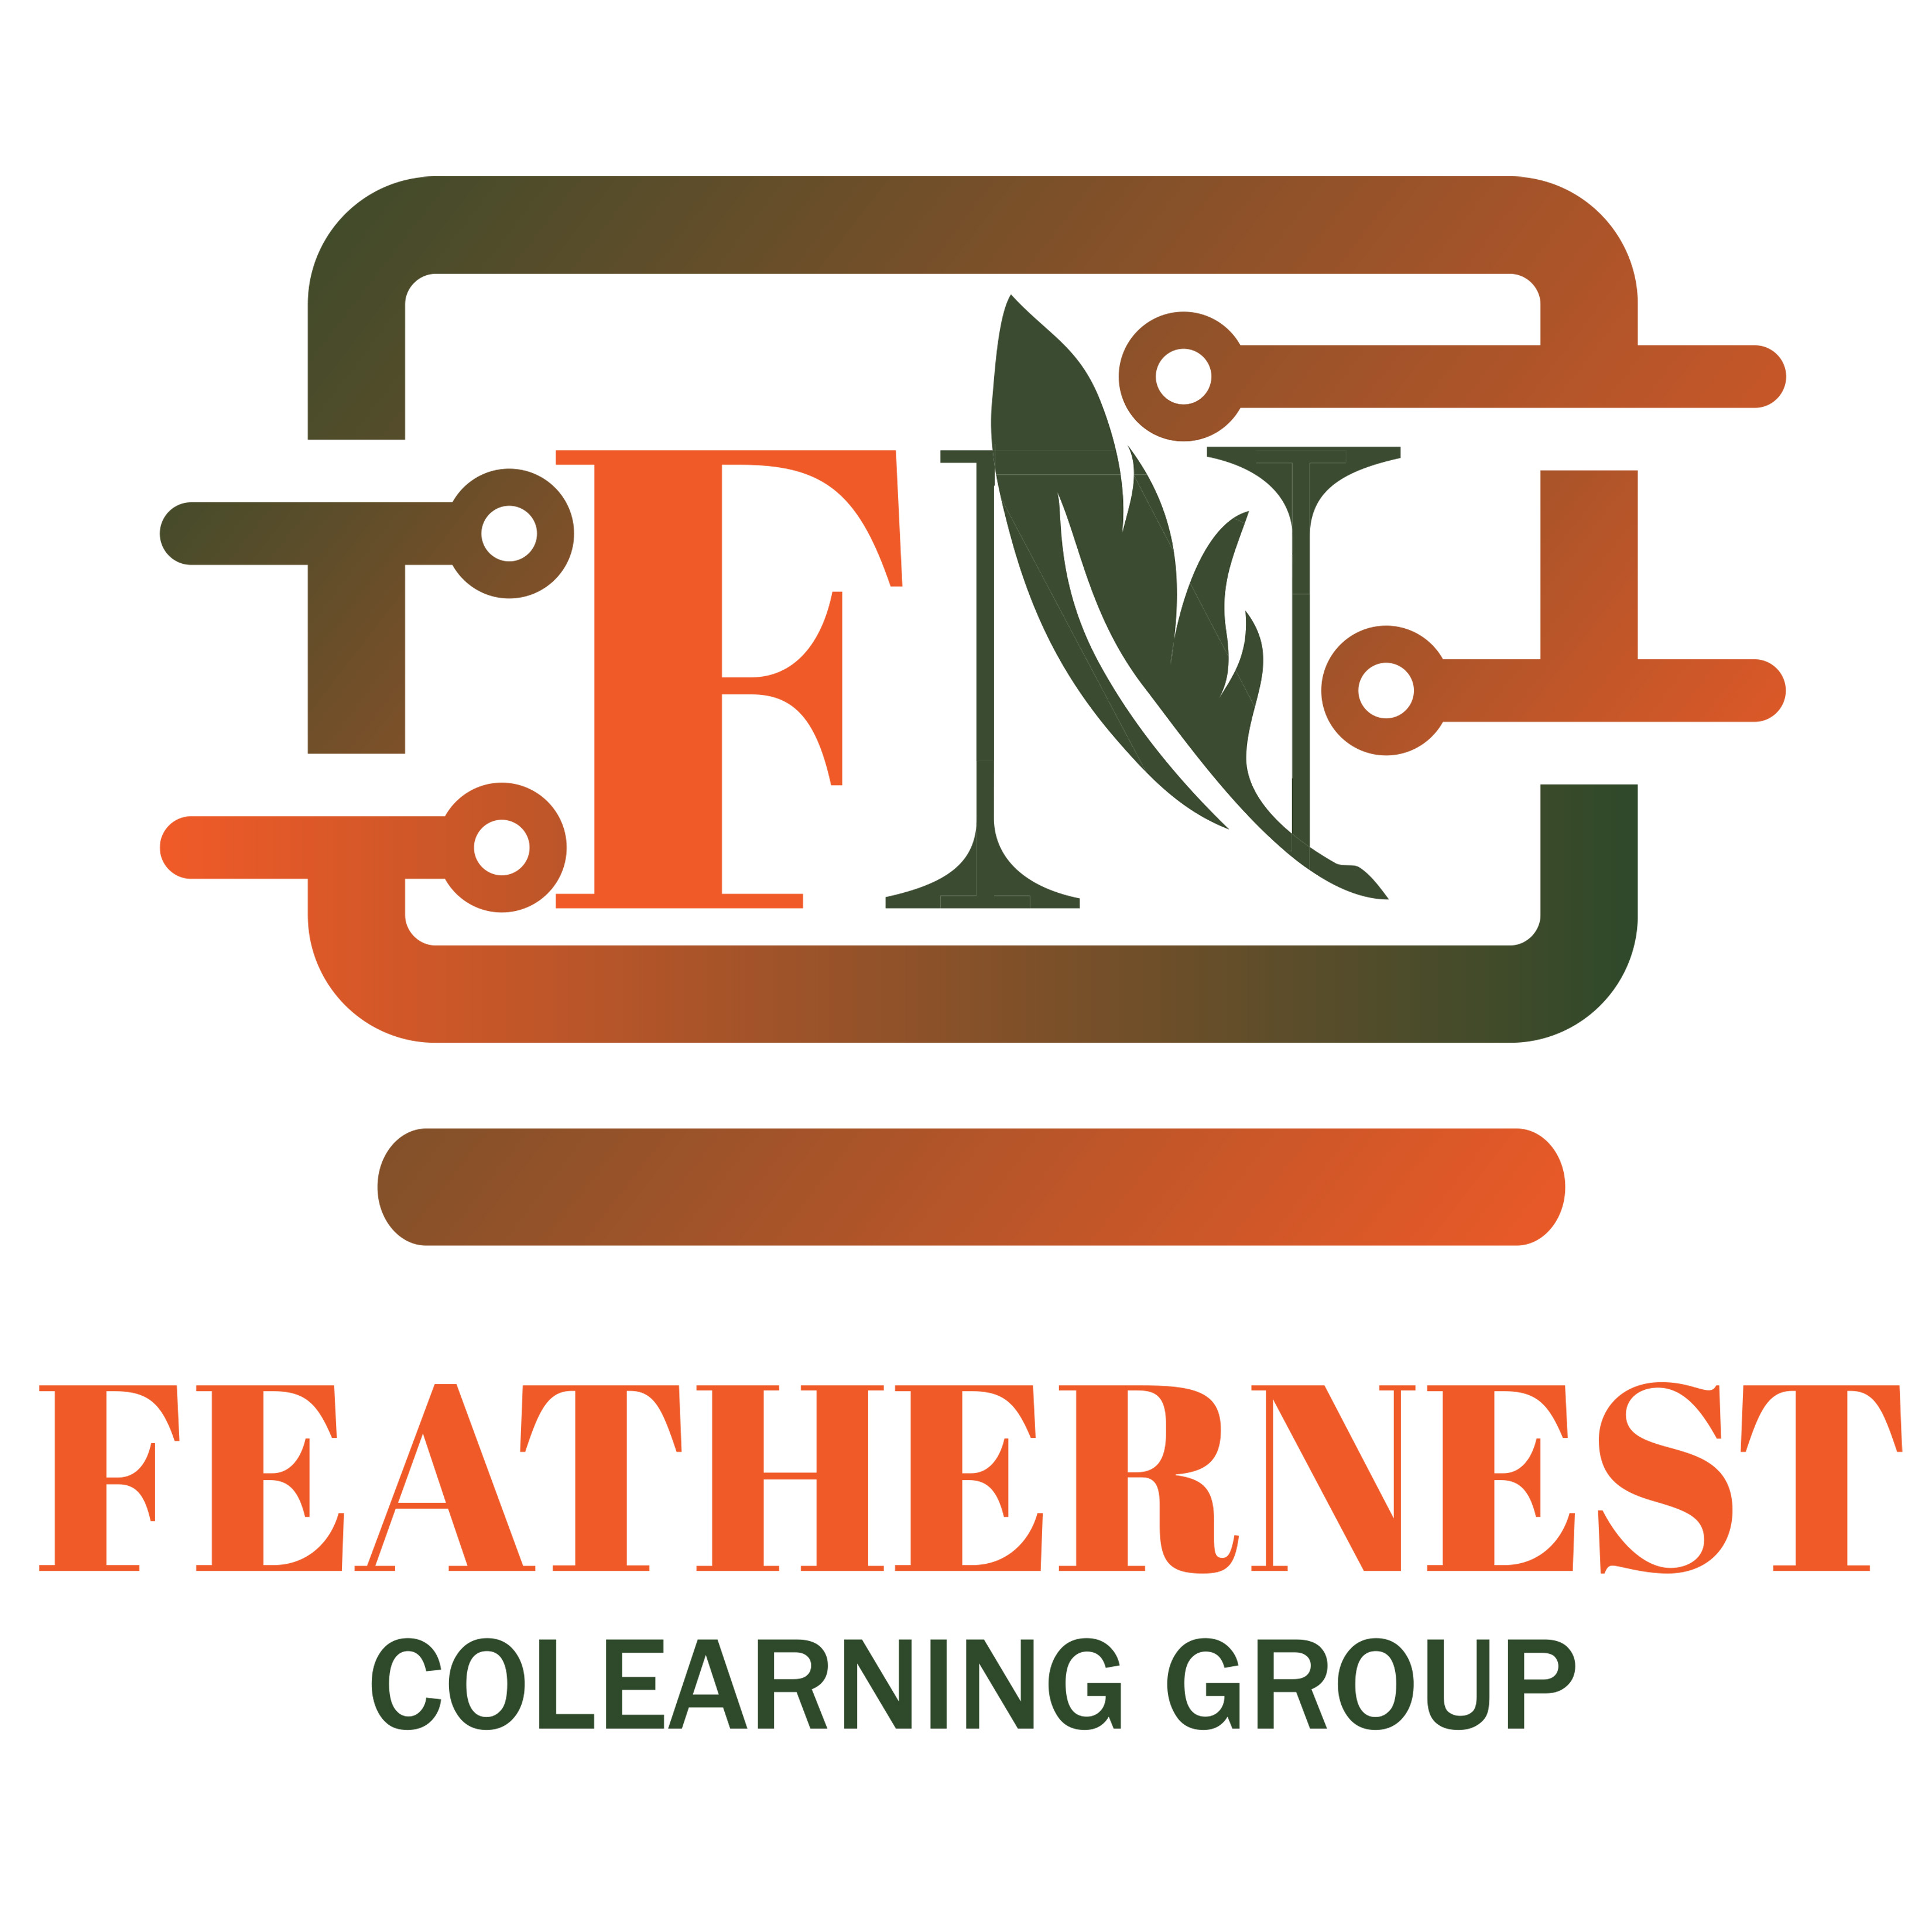 Feathernest CoLearning Group